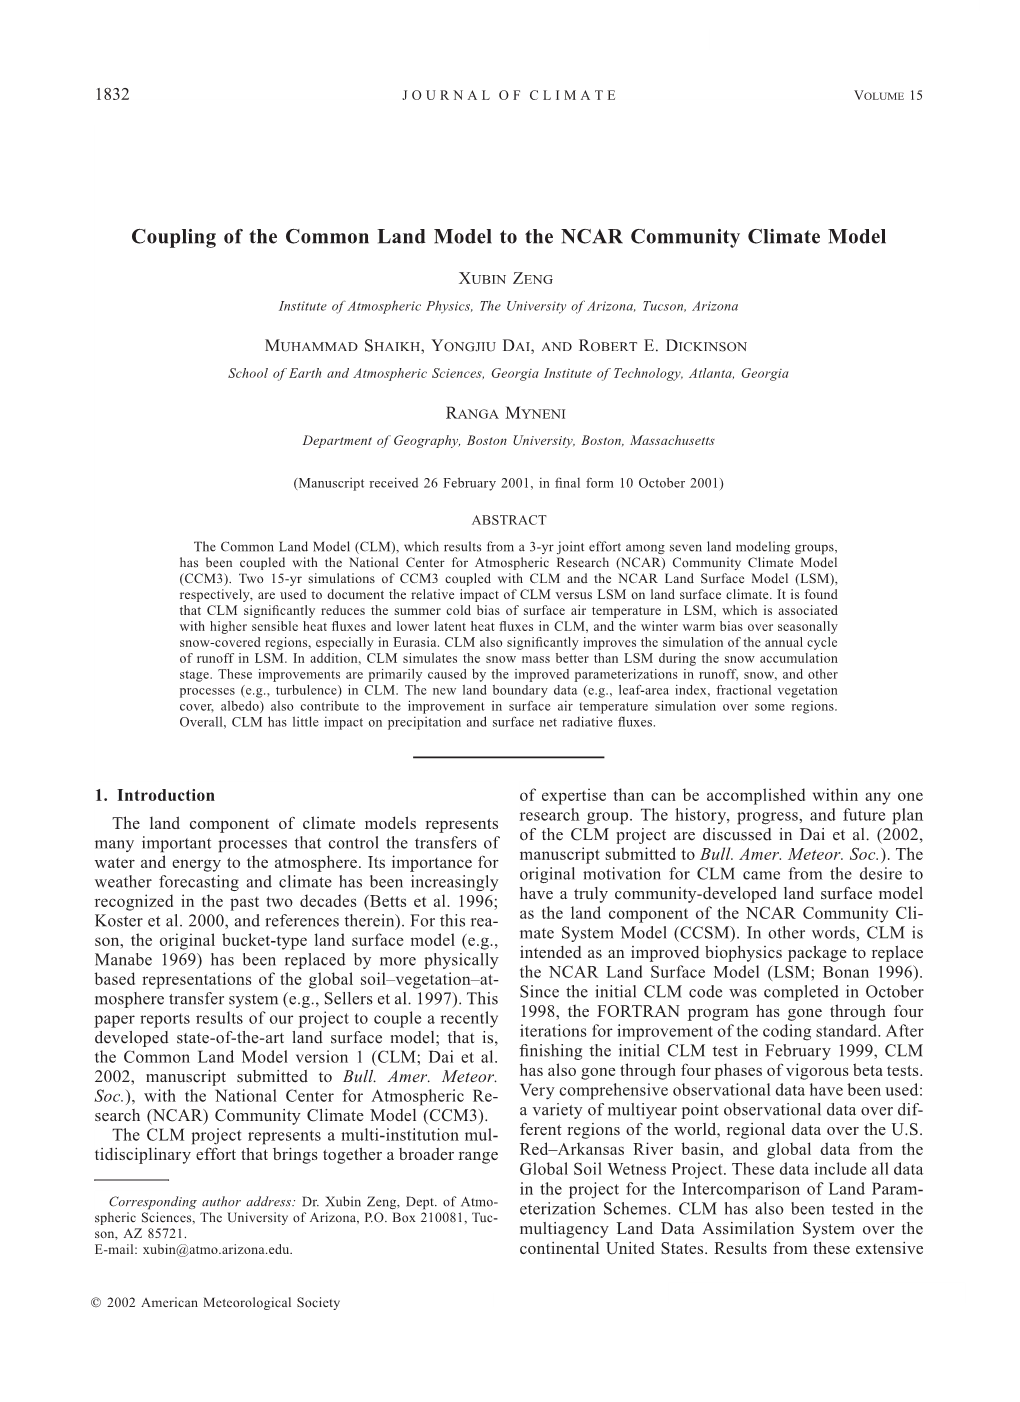 Coupling of the Common Land Model to the NCAR Community Climate Model